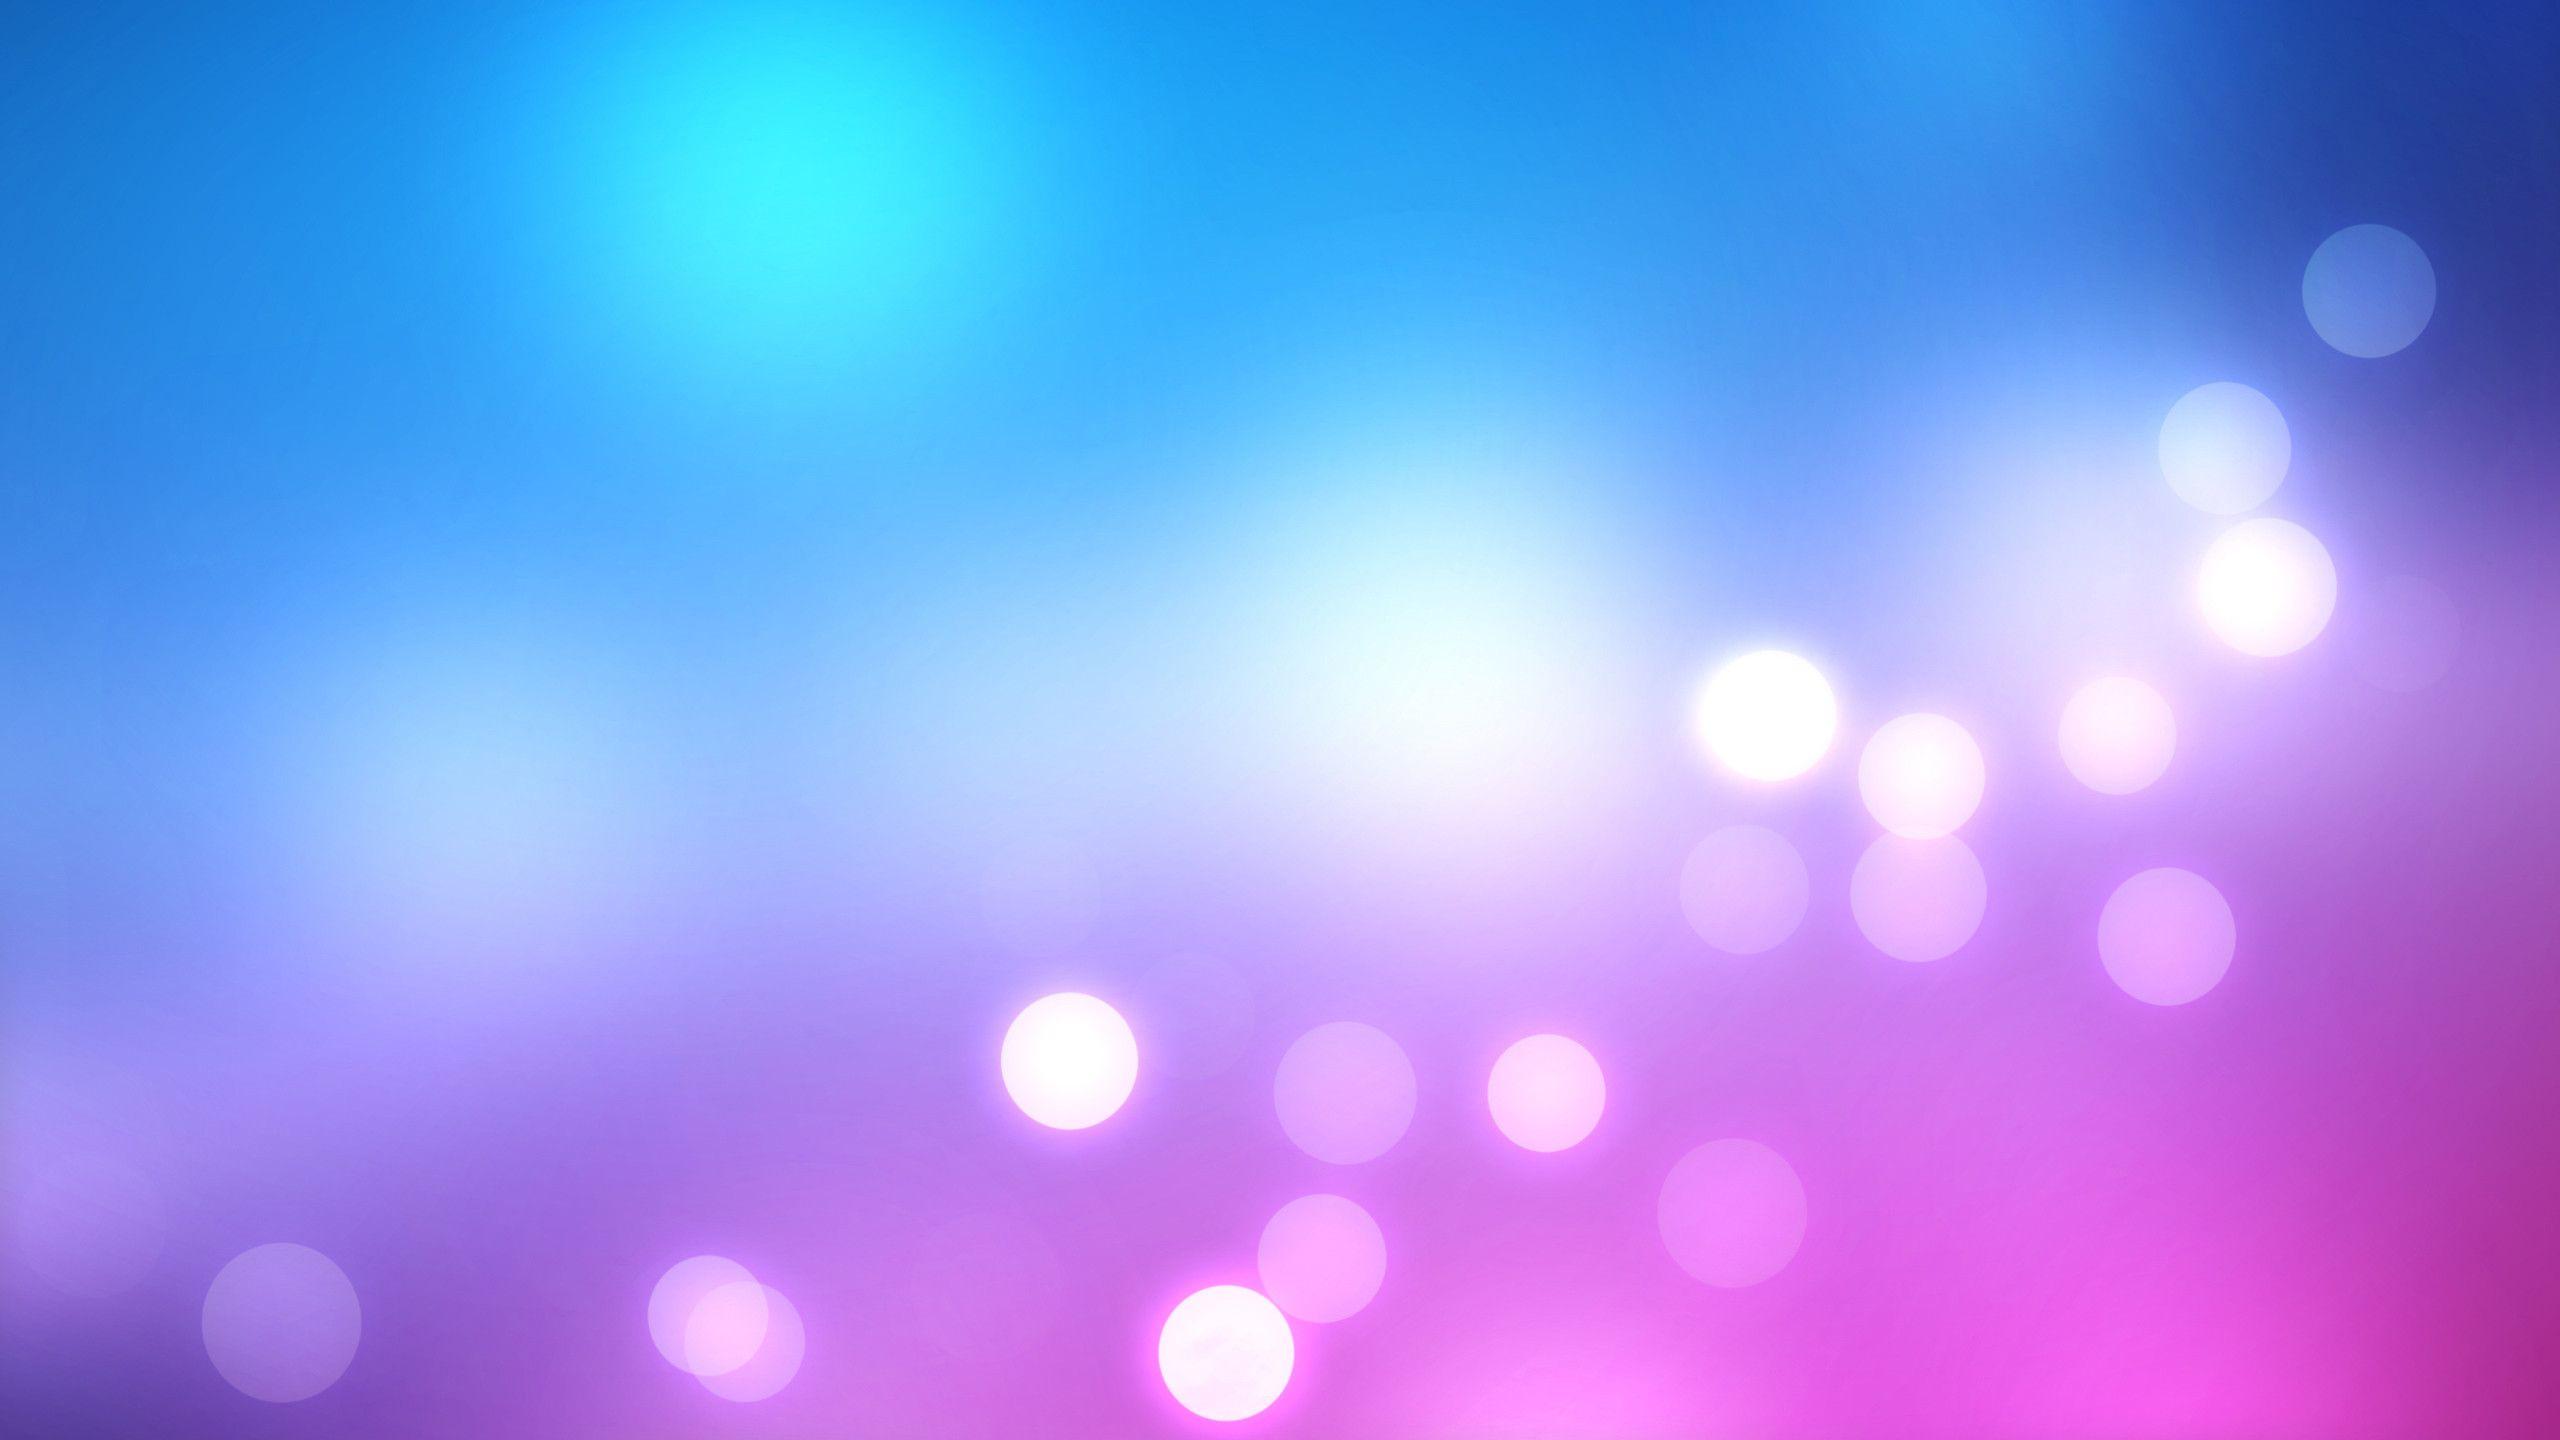 Wallpaper.wiki Blue And Purple Wallpaper HD PIC WPB002061